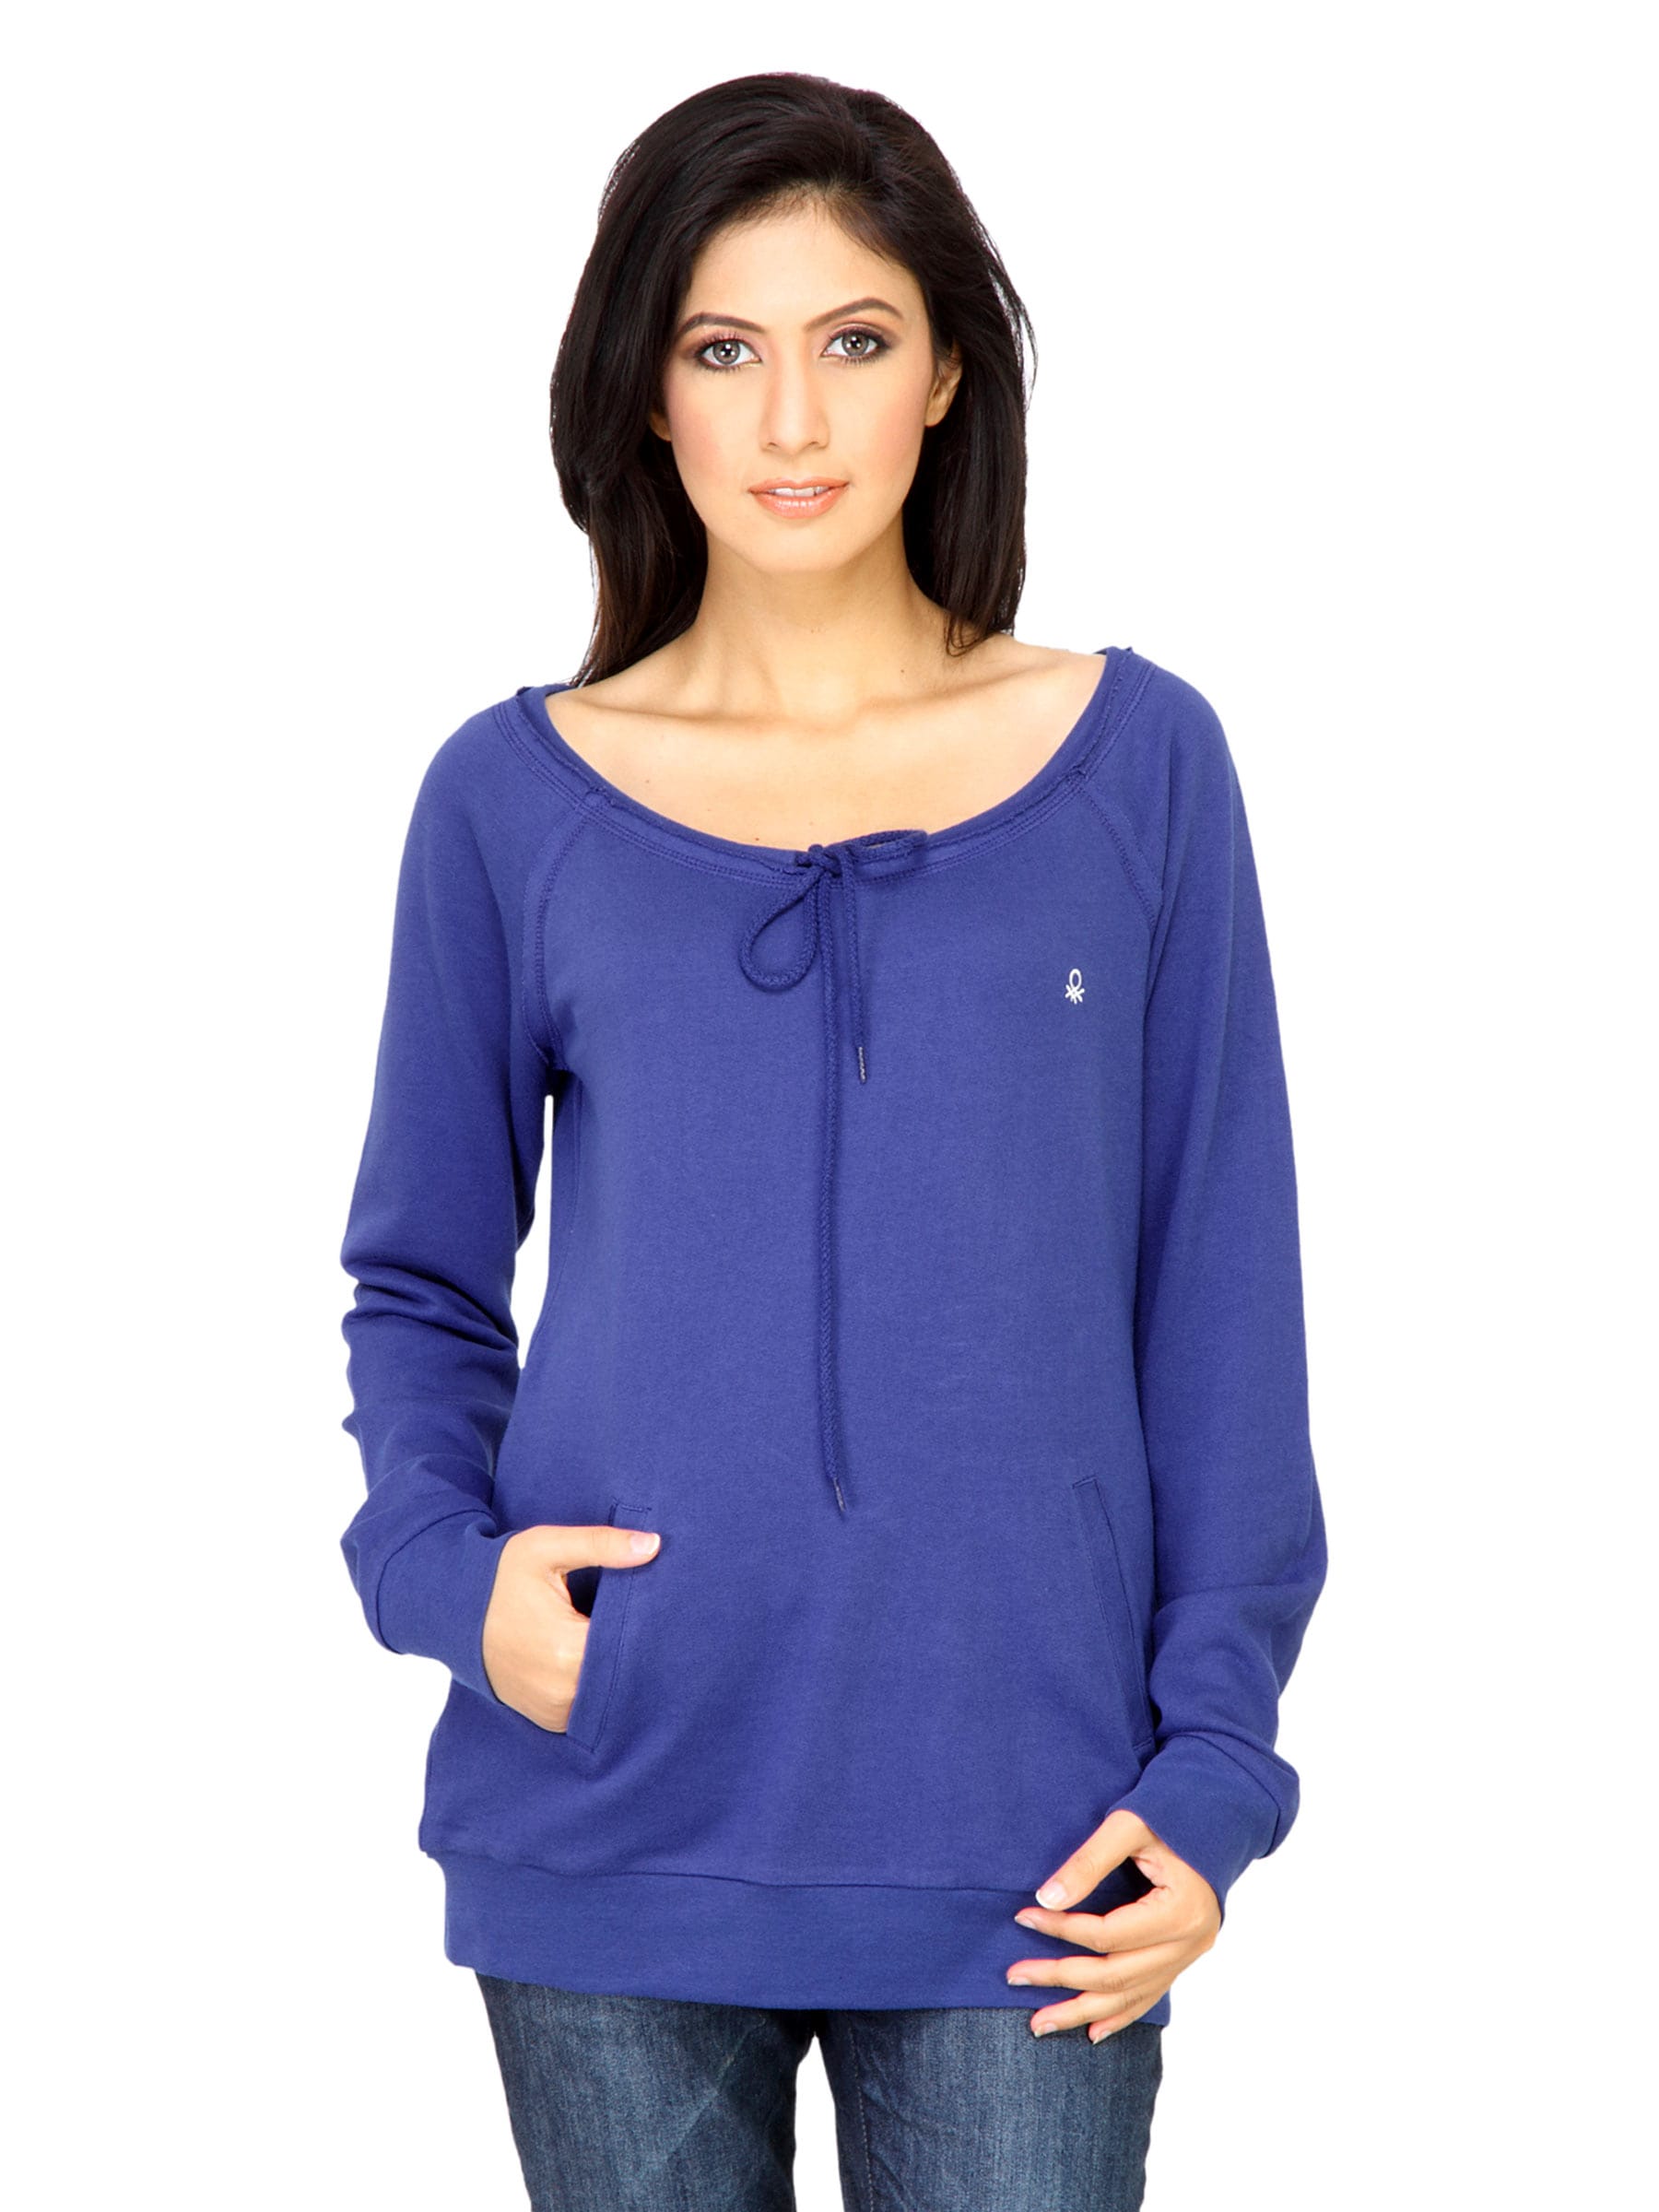 United Colors of Benetton Women Solid Blue Sweat Shirts